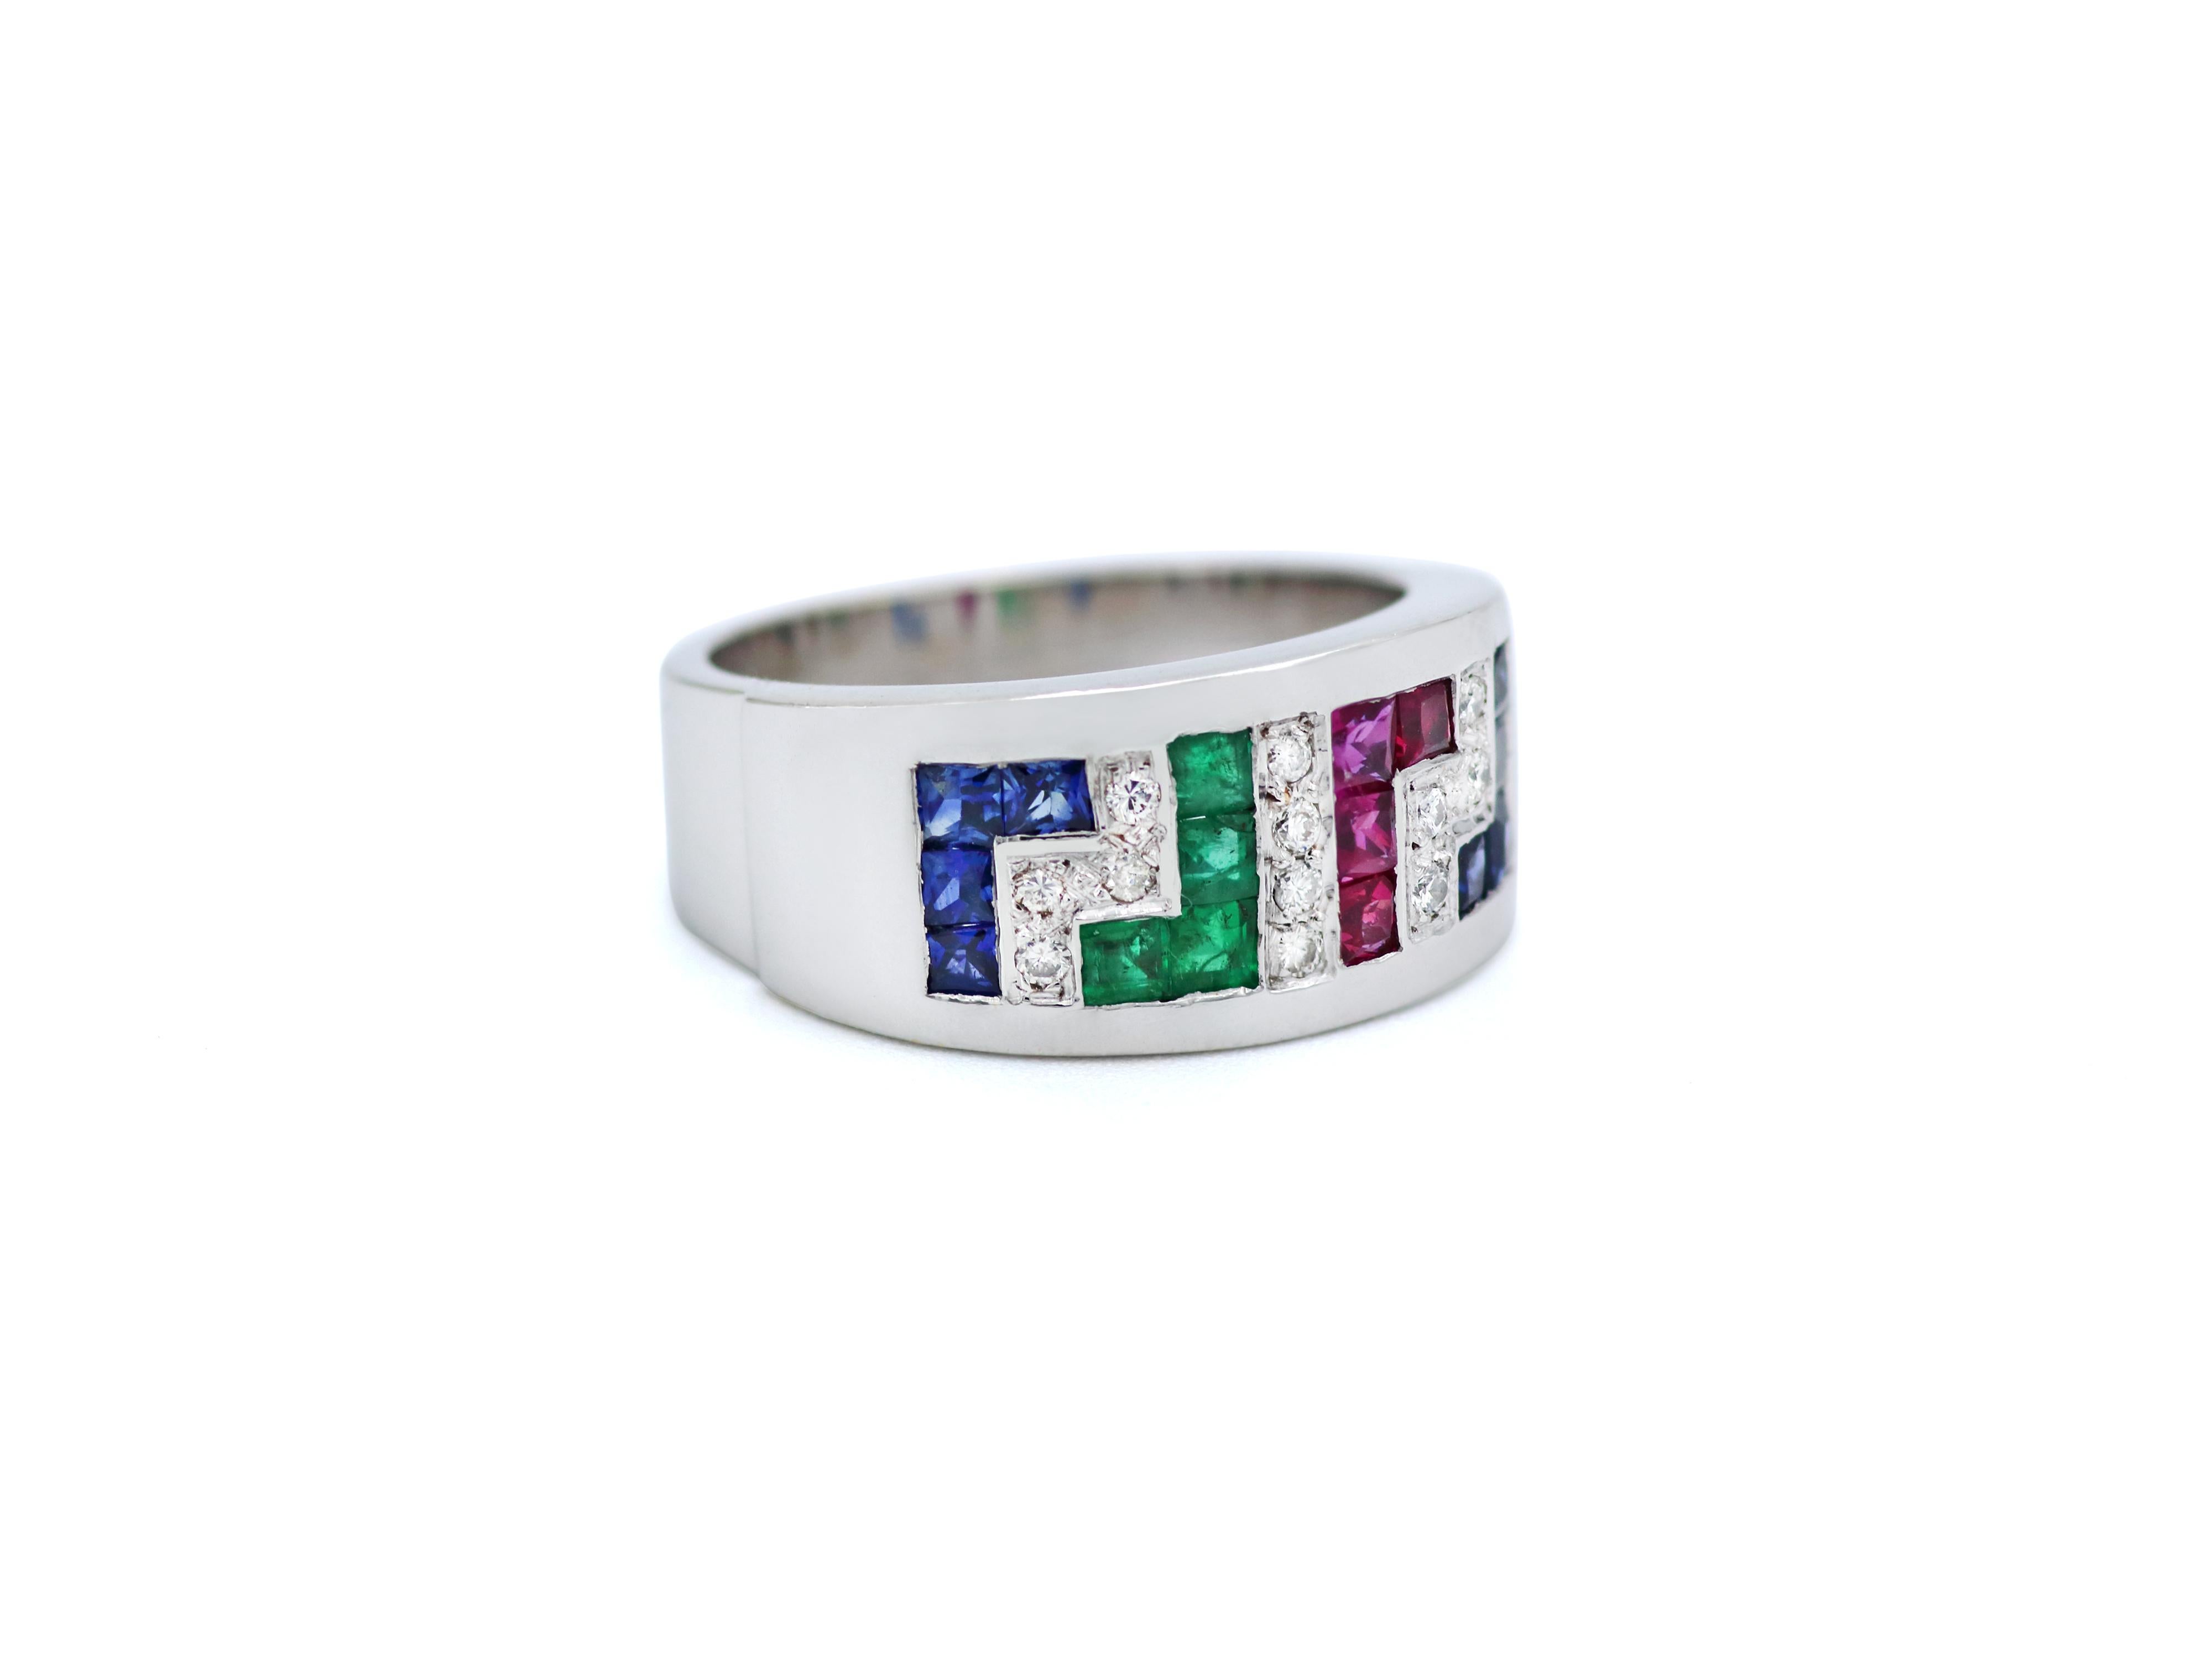 Band ring in 18 karats white gold set with colorful gems, 1 carat of Rubies, Emeralds, Sapphires and 0.15 carats of natural brilliant cut diamonds that adds light and luxury to the piece. 

DIMENSIONS
Band top width: 0.354